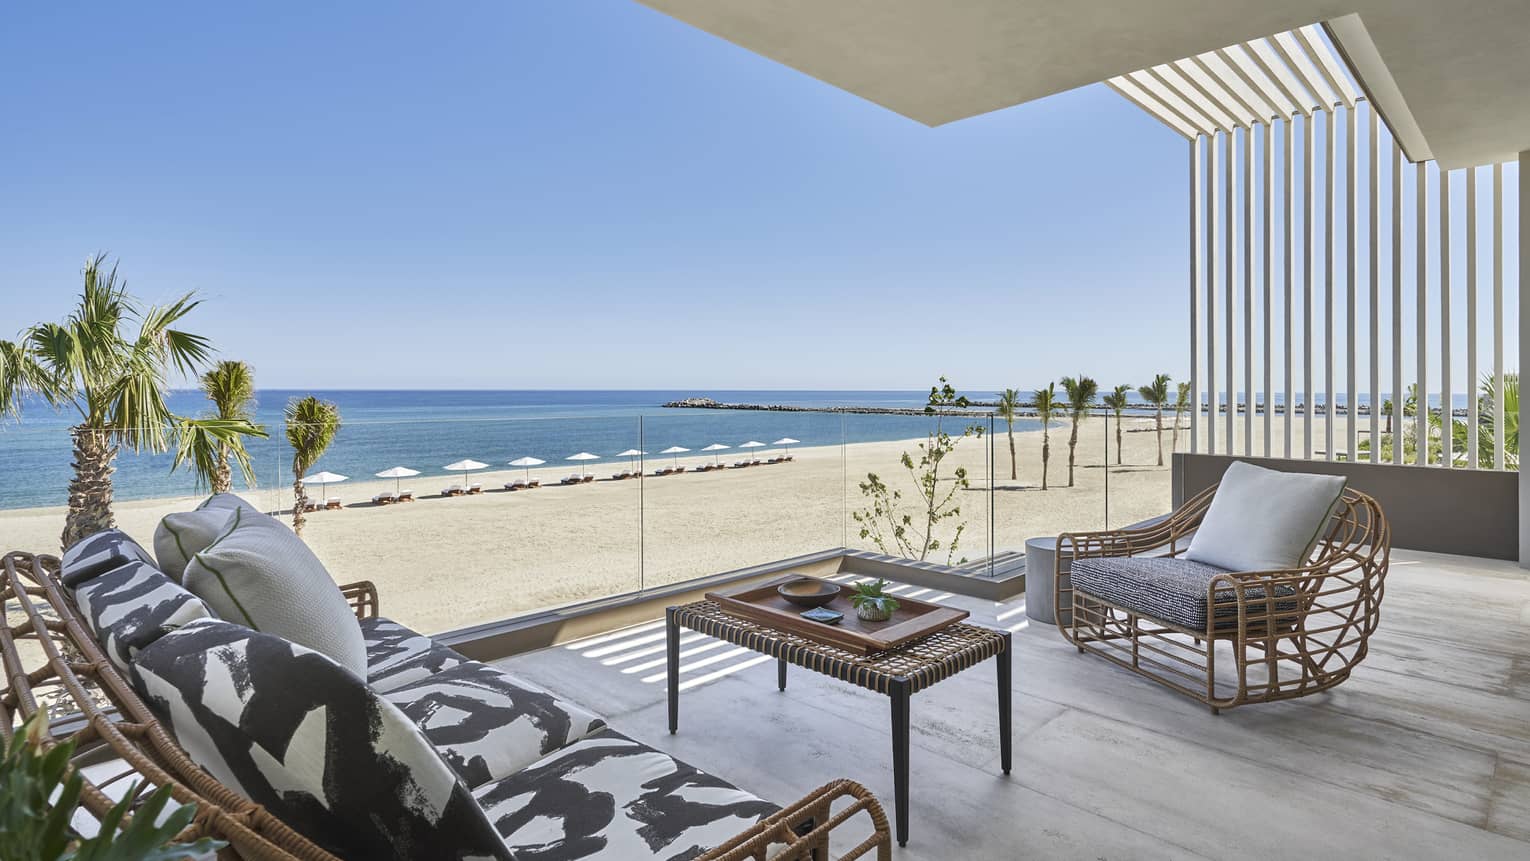 Outdoor terrace with modern wicker sofa and arm chair, glass railing, beach and ocean view